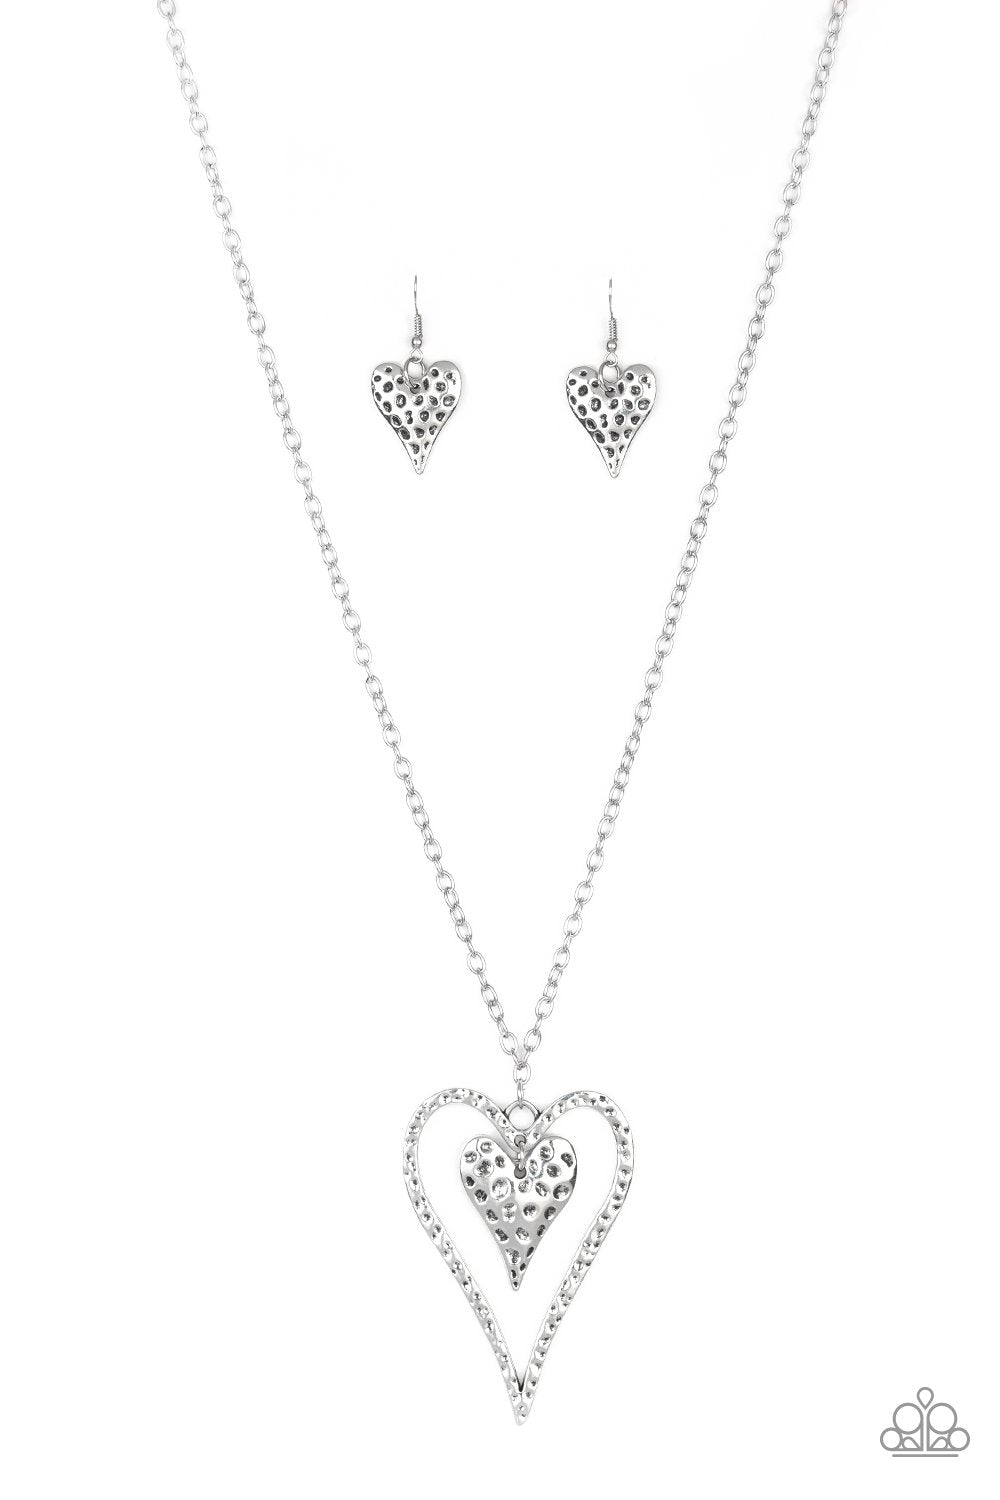 Hardened Hearts Long Silver Necklace and matching Earrings - Paparazzi Accessories-CarasShop.com - $5 Jewelry by Cara Jewels